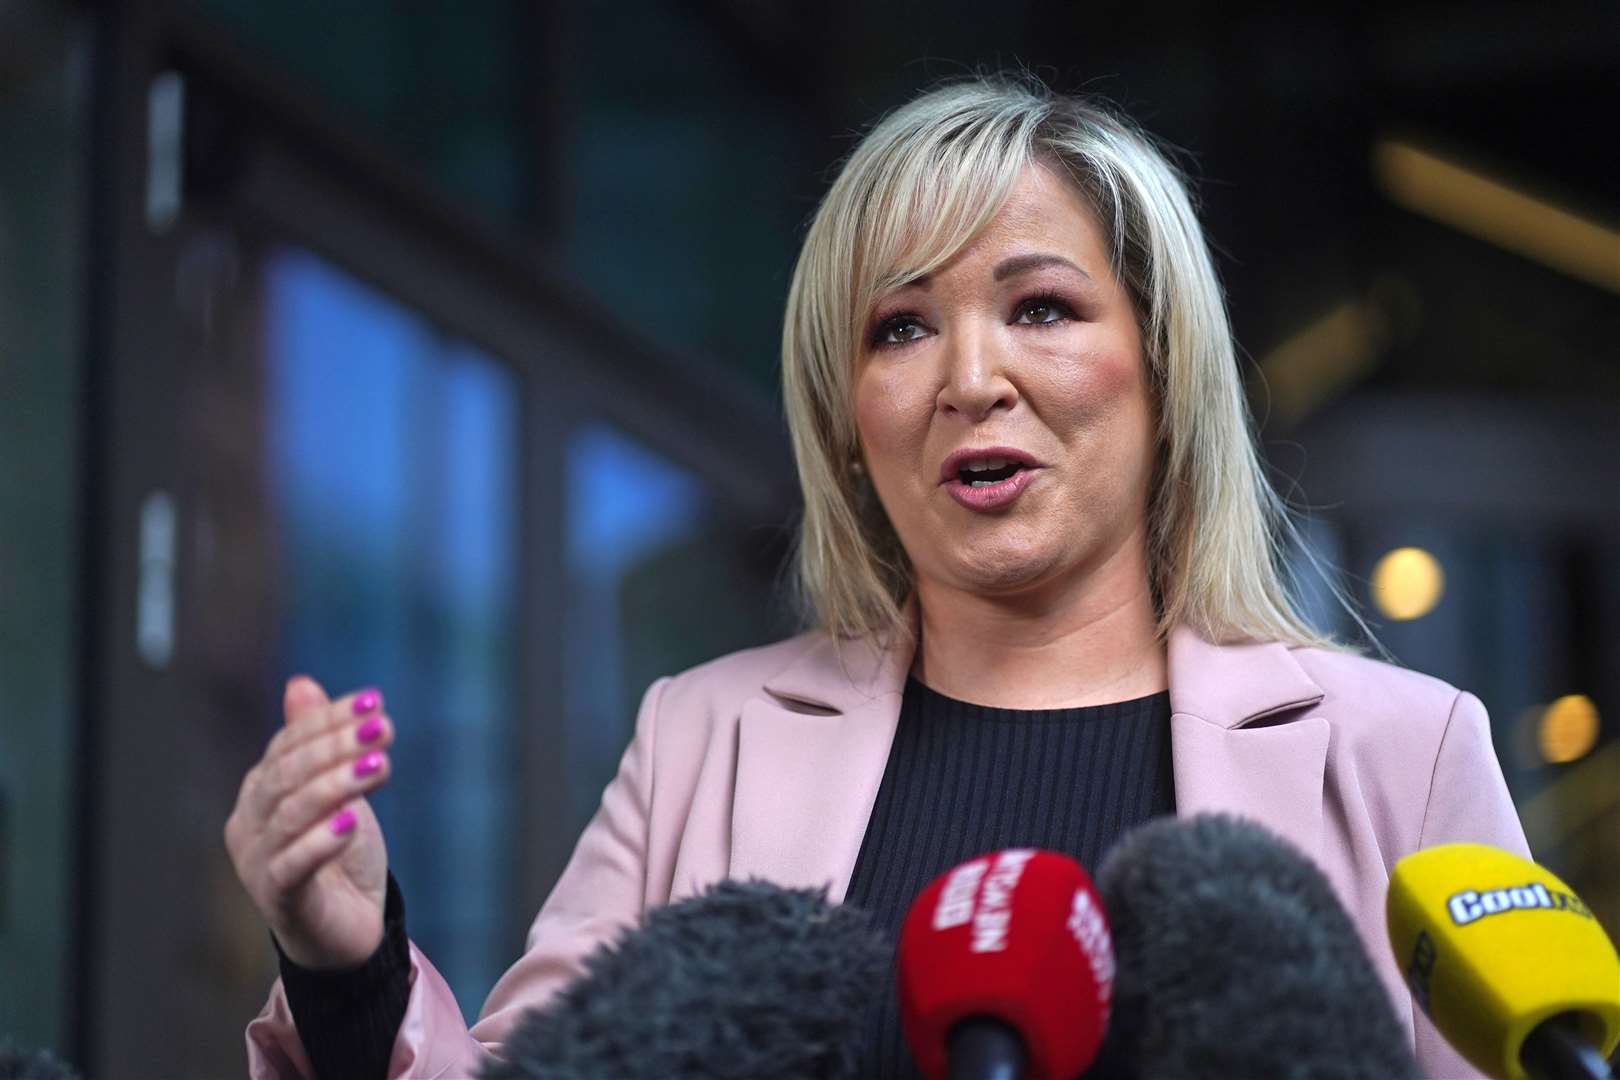 Sinn Fein vice president Michelle O’Neill speaking to the media outside the Grand Central Hotel in Belfast following her meeting with Irish Foreign Affairs Minister and Tanaiste Micheal Martin. (Brian Lawless/PA)